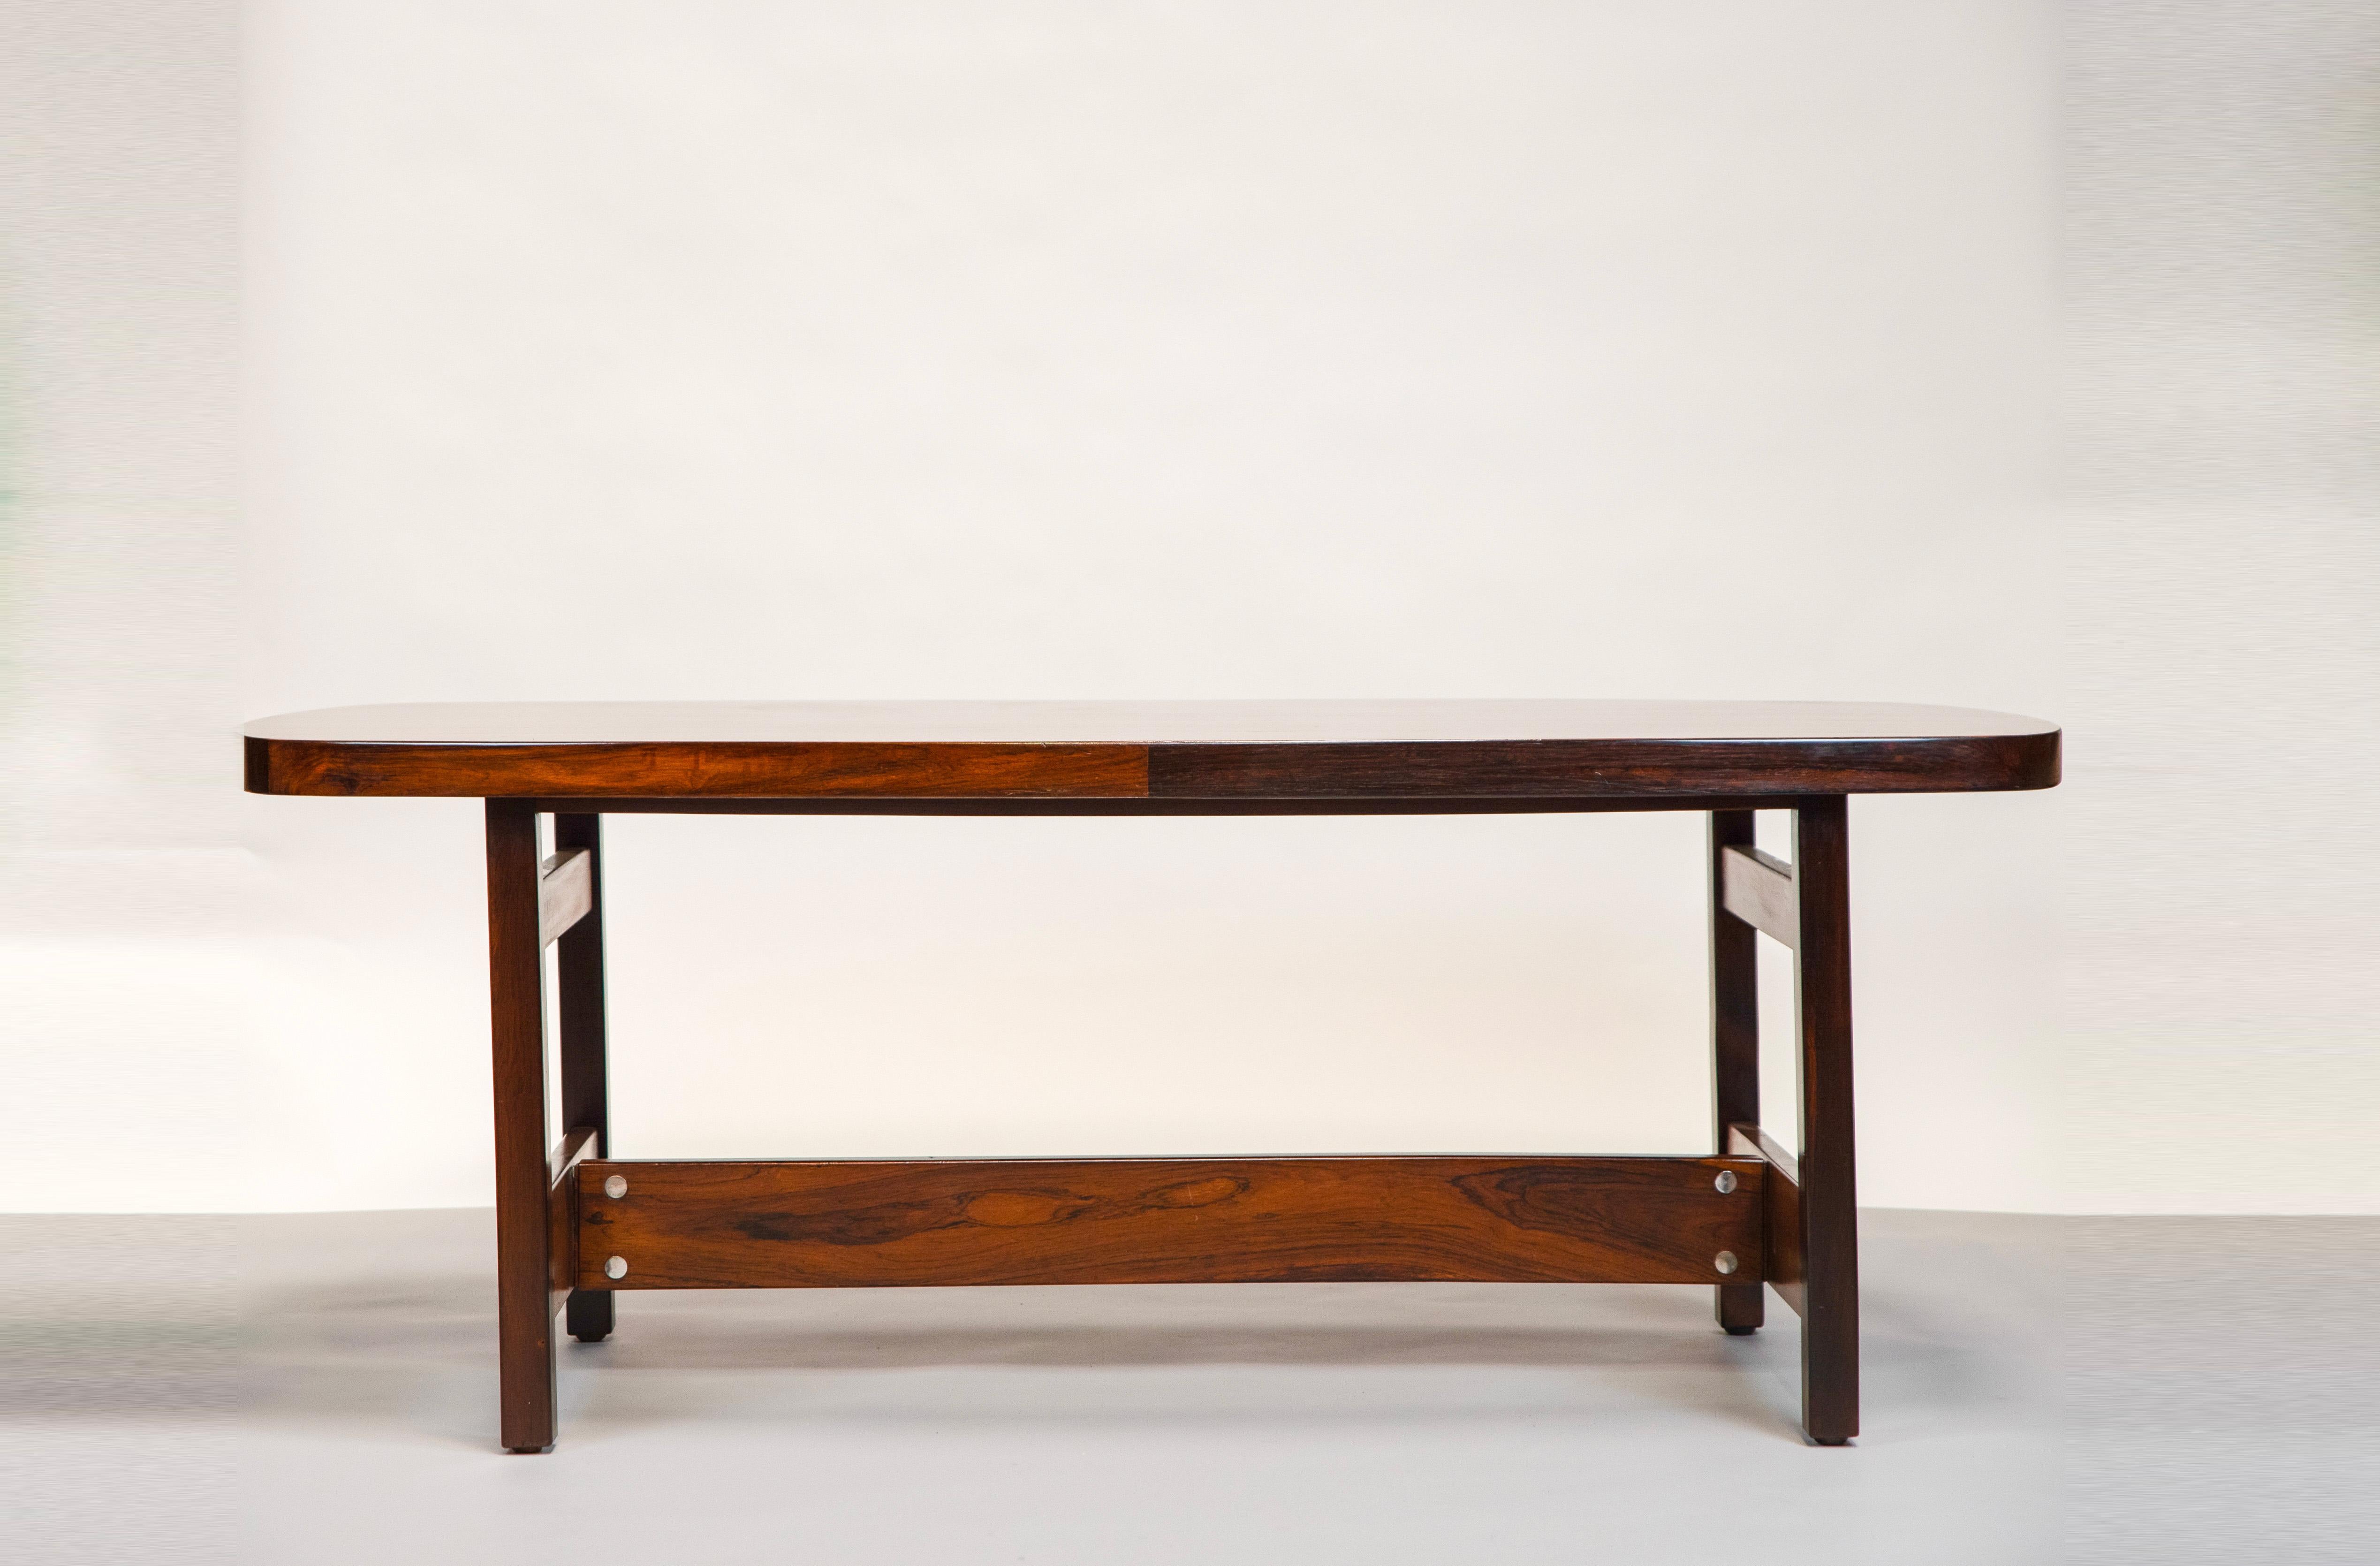 Sergio Rodrigues, Table 